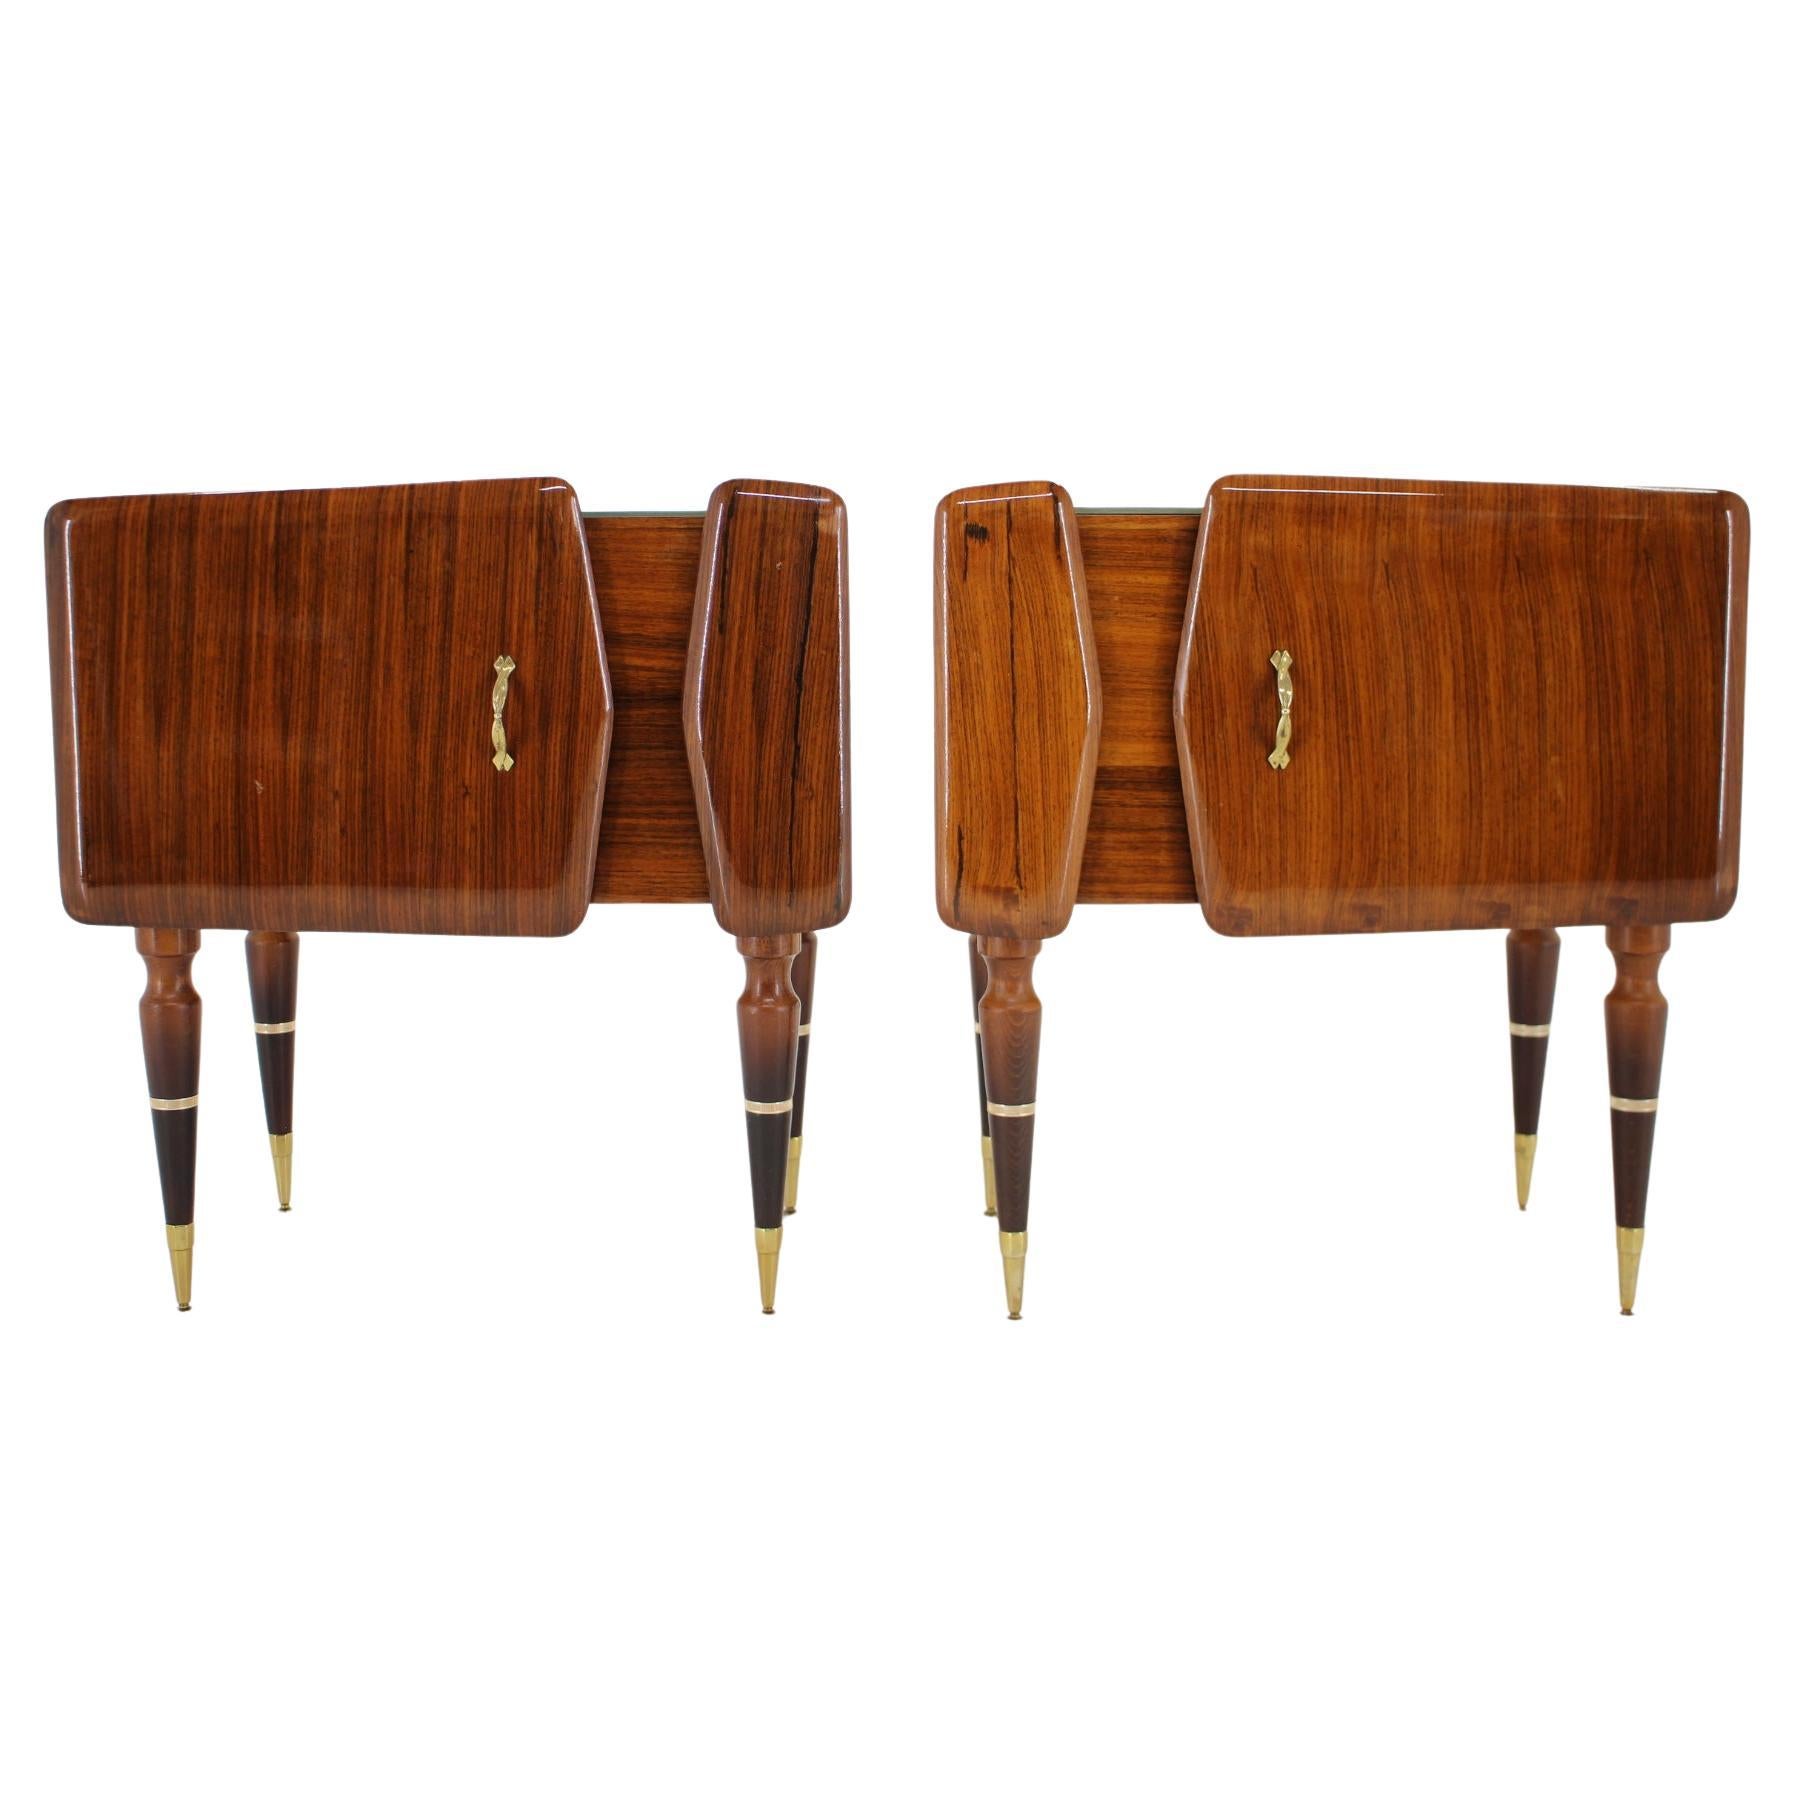 1960s Pair of Sculptural Wooden Bedside Tables, Italy For Sale